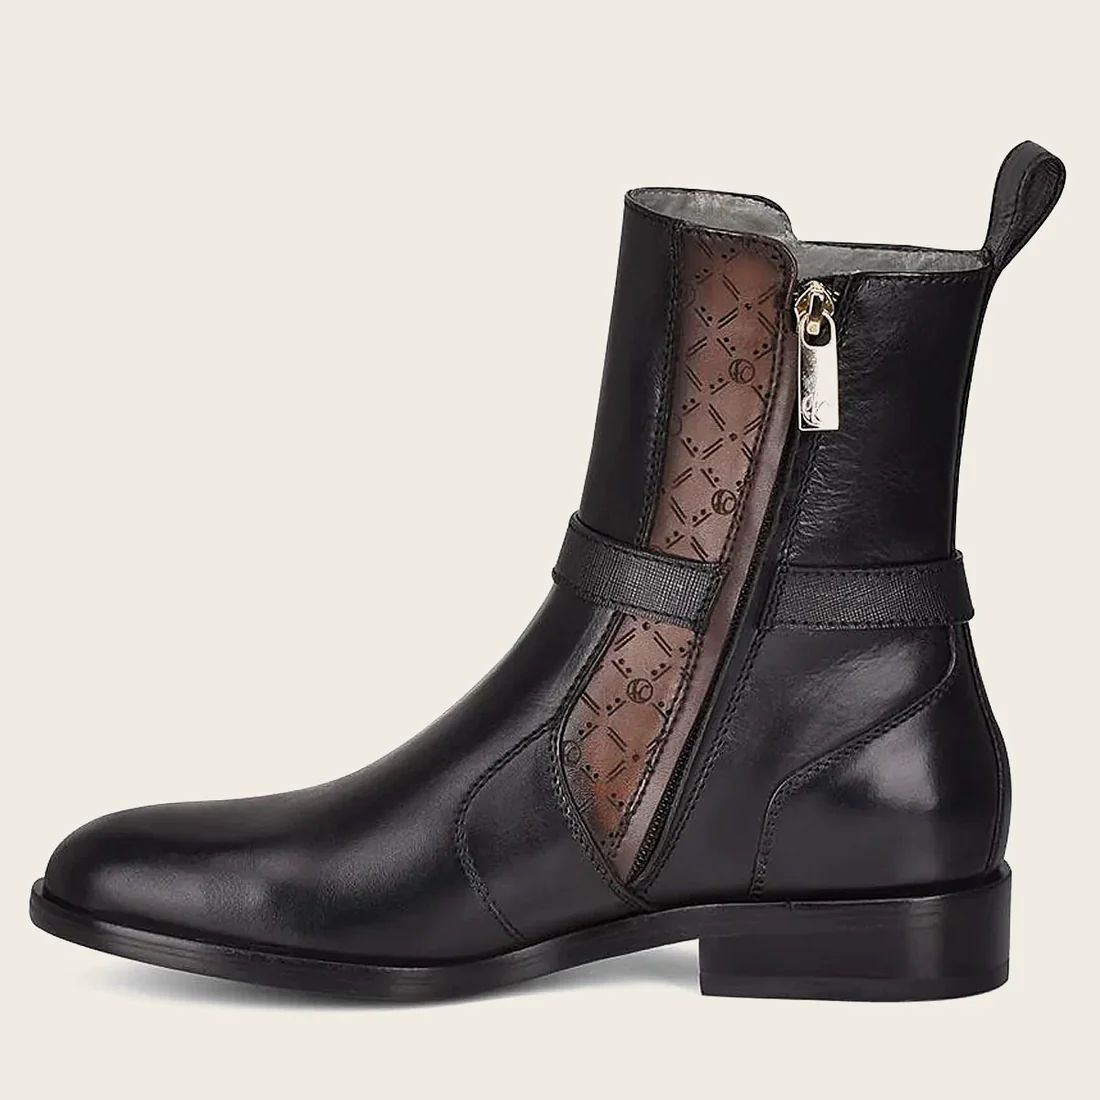 Cuadra | Hand-Painted Black Leather Engraved Bootie